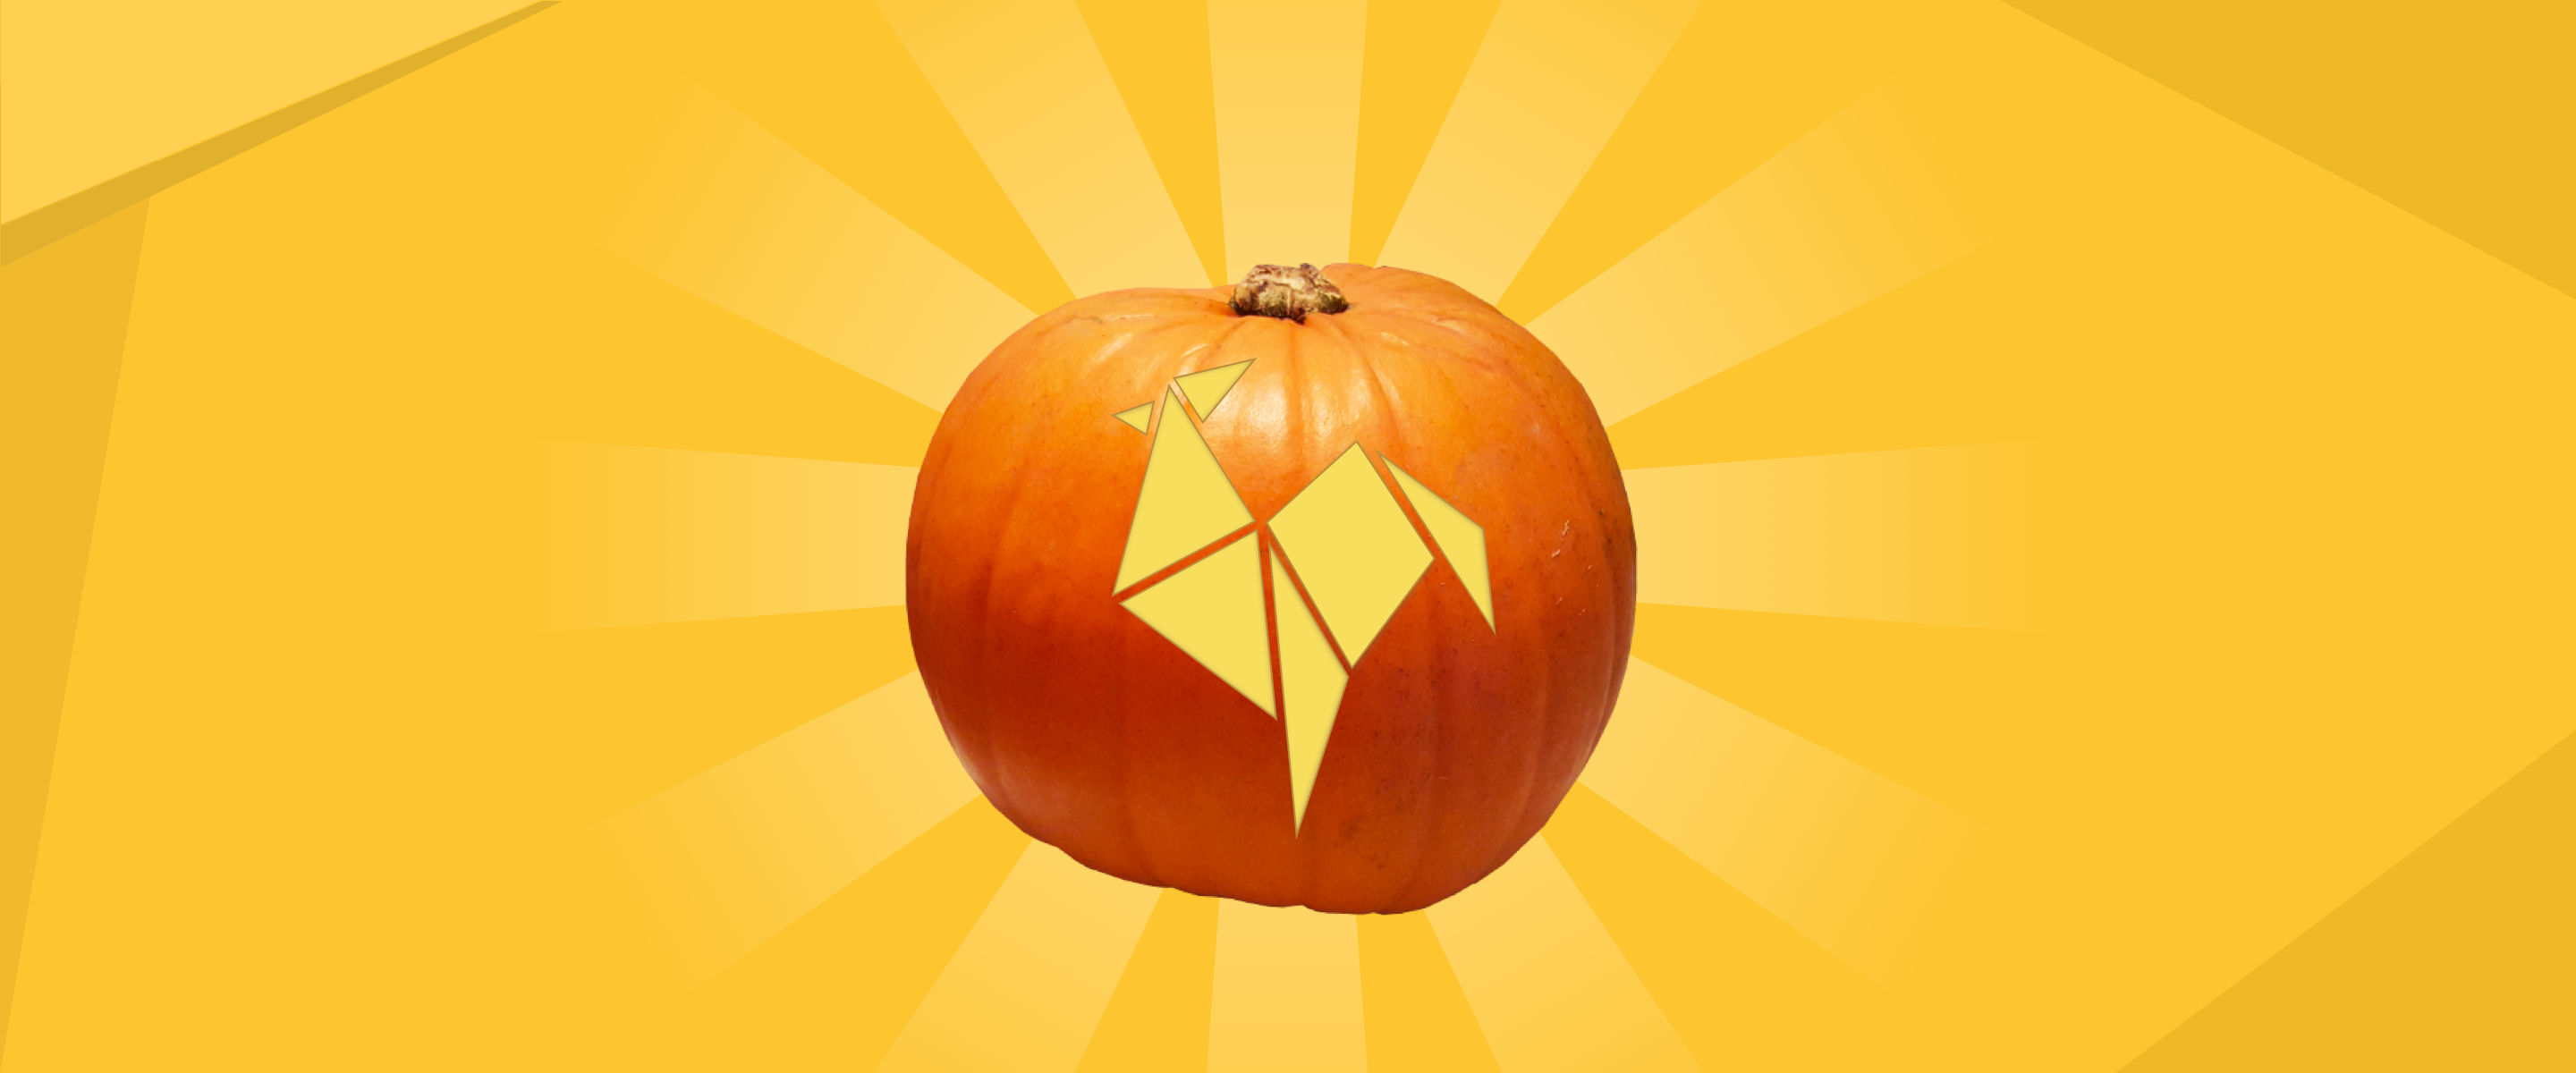 Illustration of a shining RoosterMoney logo carved Halloween pumpkins on a gold background with decorative origami in the corners